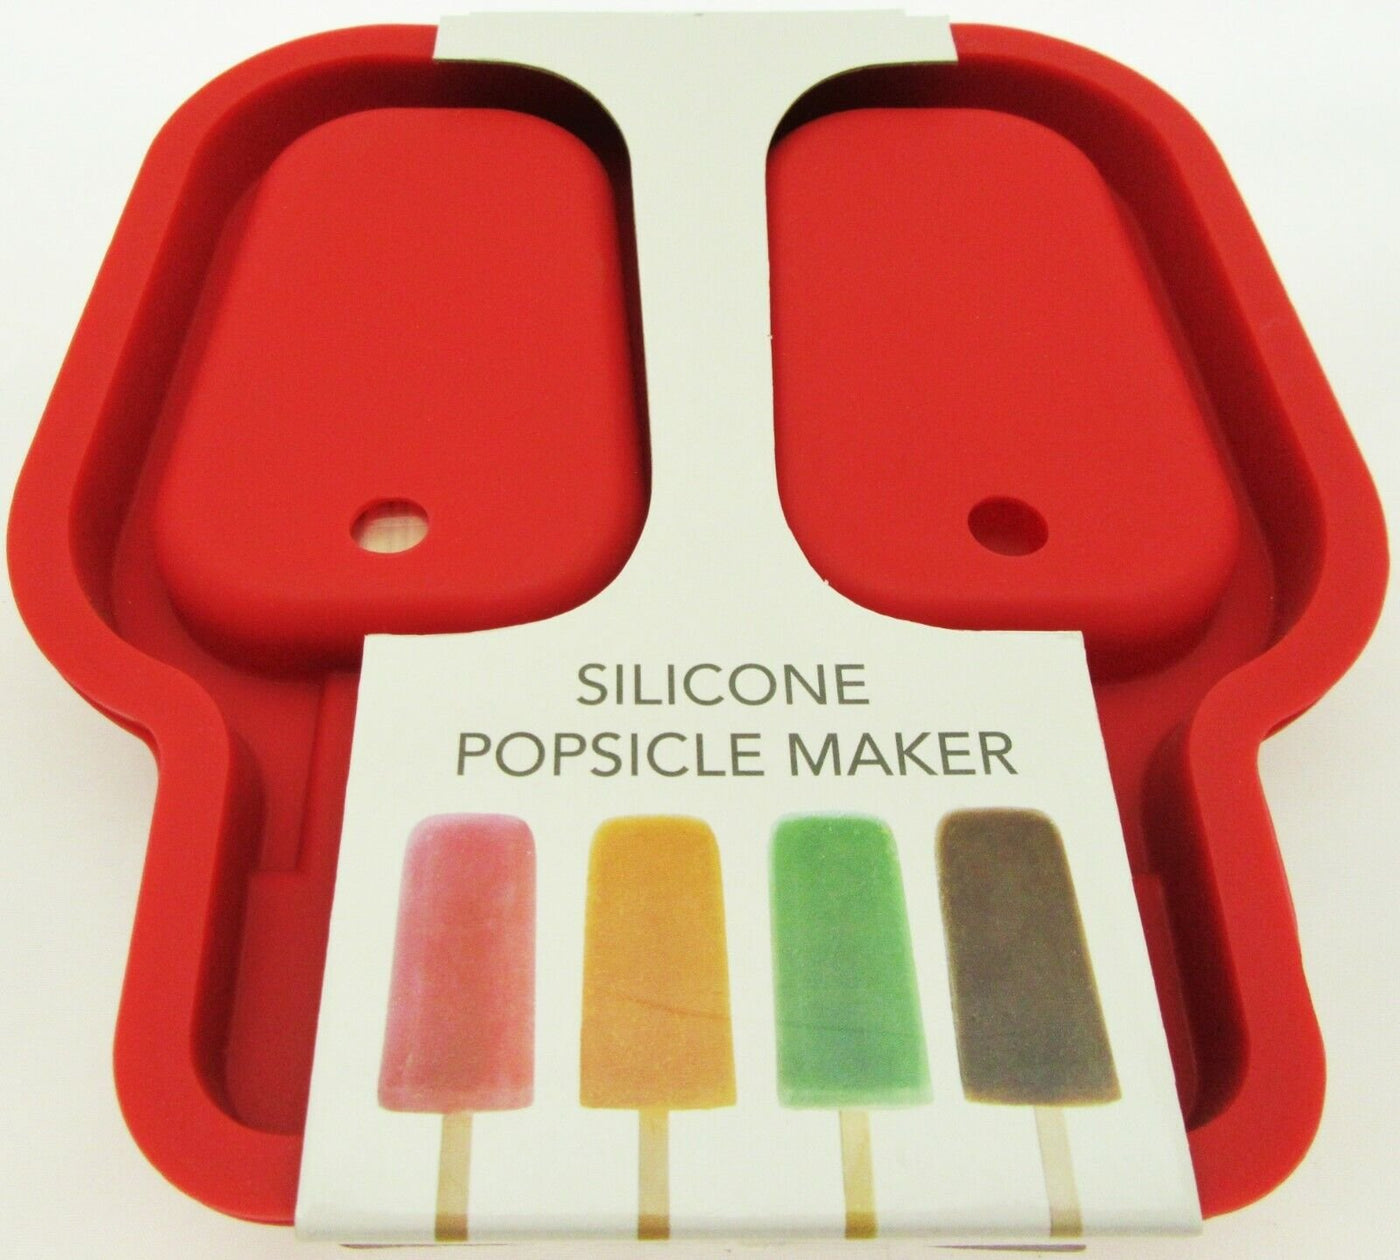 Silicone Popsicle Maker Tray ~ Sticks Included Flexible ~ By Kolorae - Red